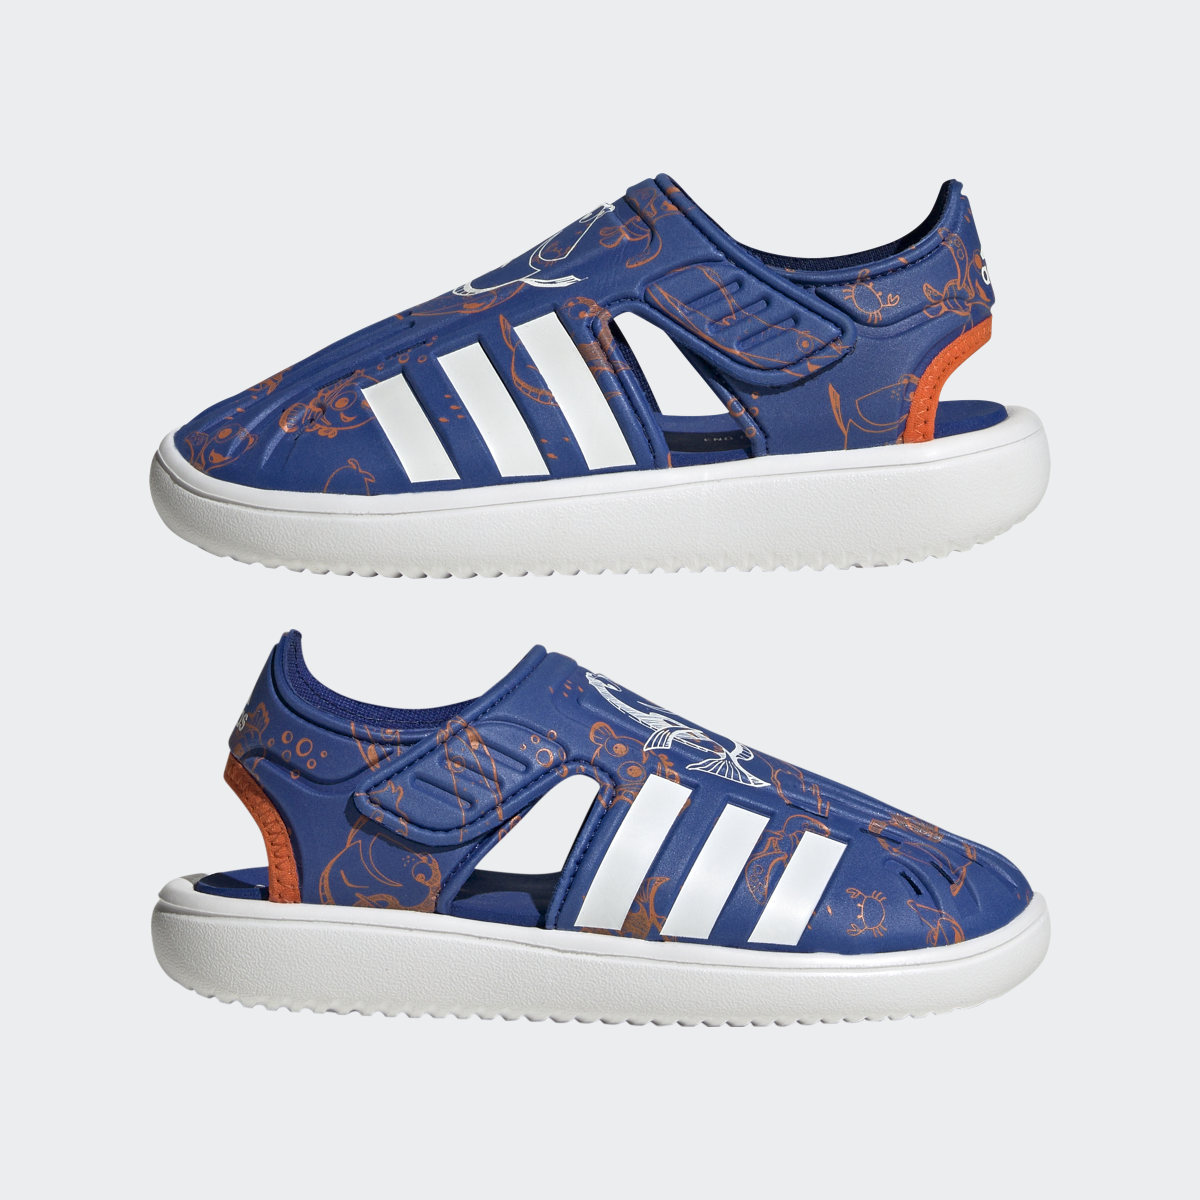 Adidas Finding Nemo and Dory Closed Toe Summer Sandalet. 8